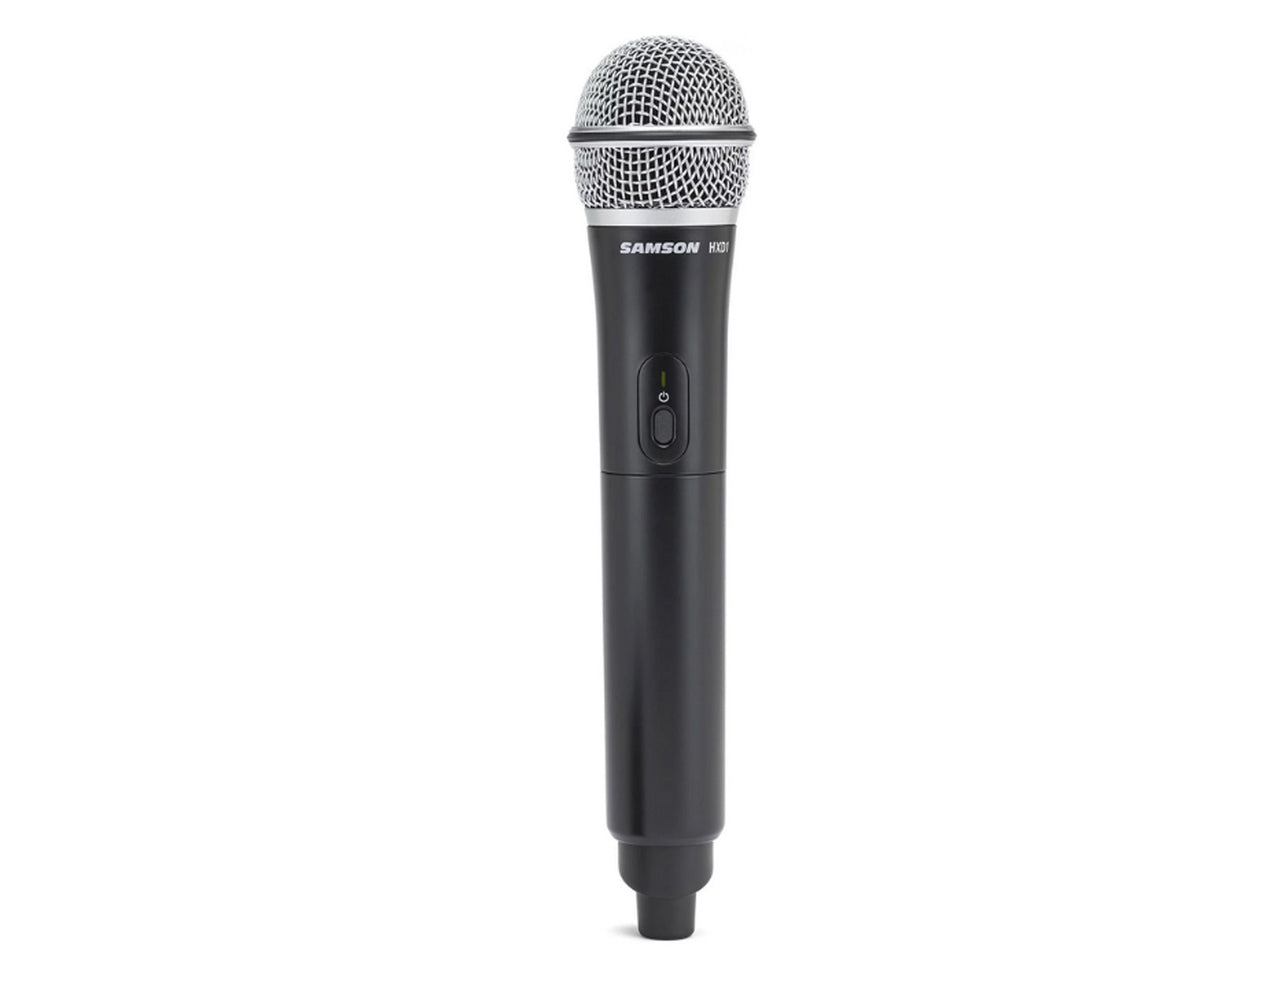 SAMSON Stage XPD2 (SWXPD2HQ6)<br/> Handheld USB Wireless Podcast Podcasting Microphone +Mic Clip